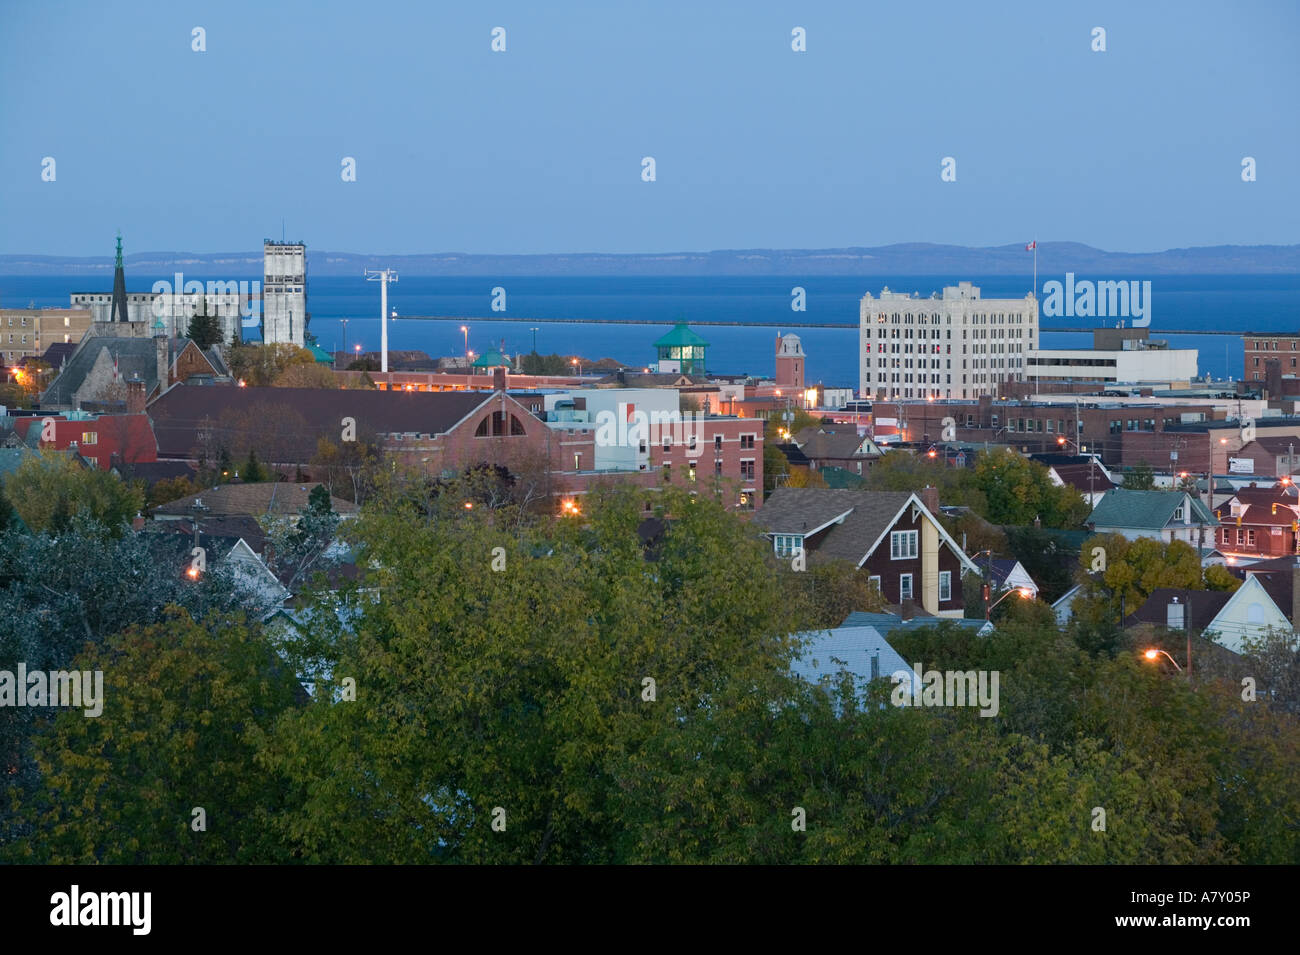 CANADA, Ontario, Thunder Bay: Town View from Hillcrest Park / Evening Stock Photo